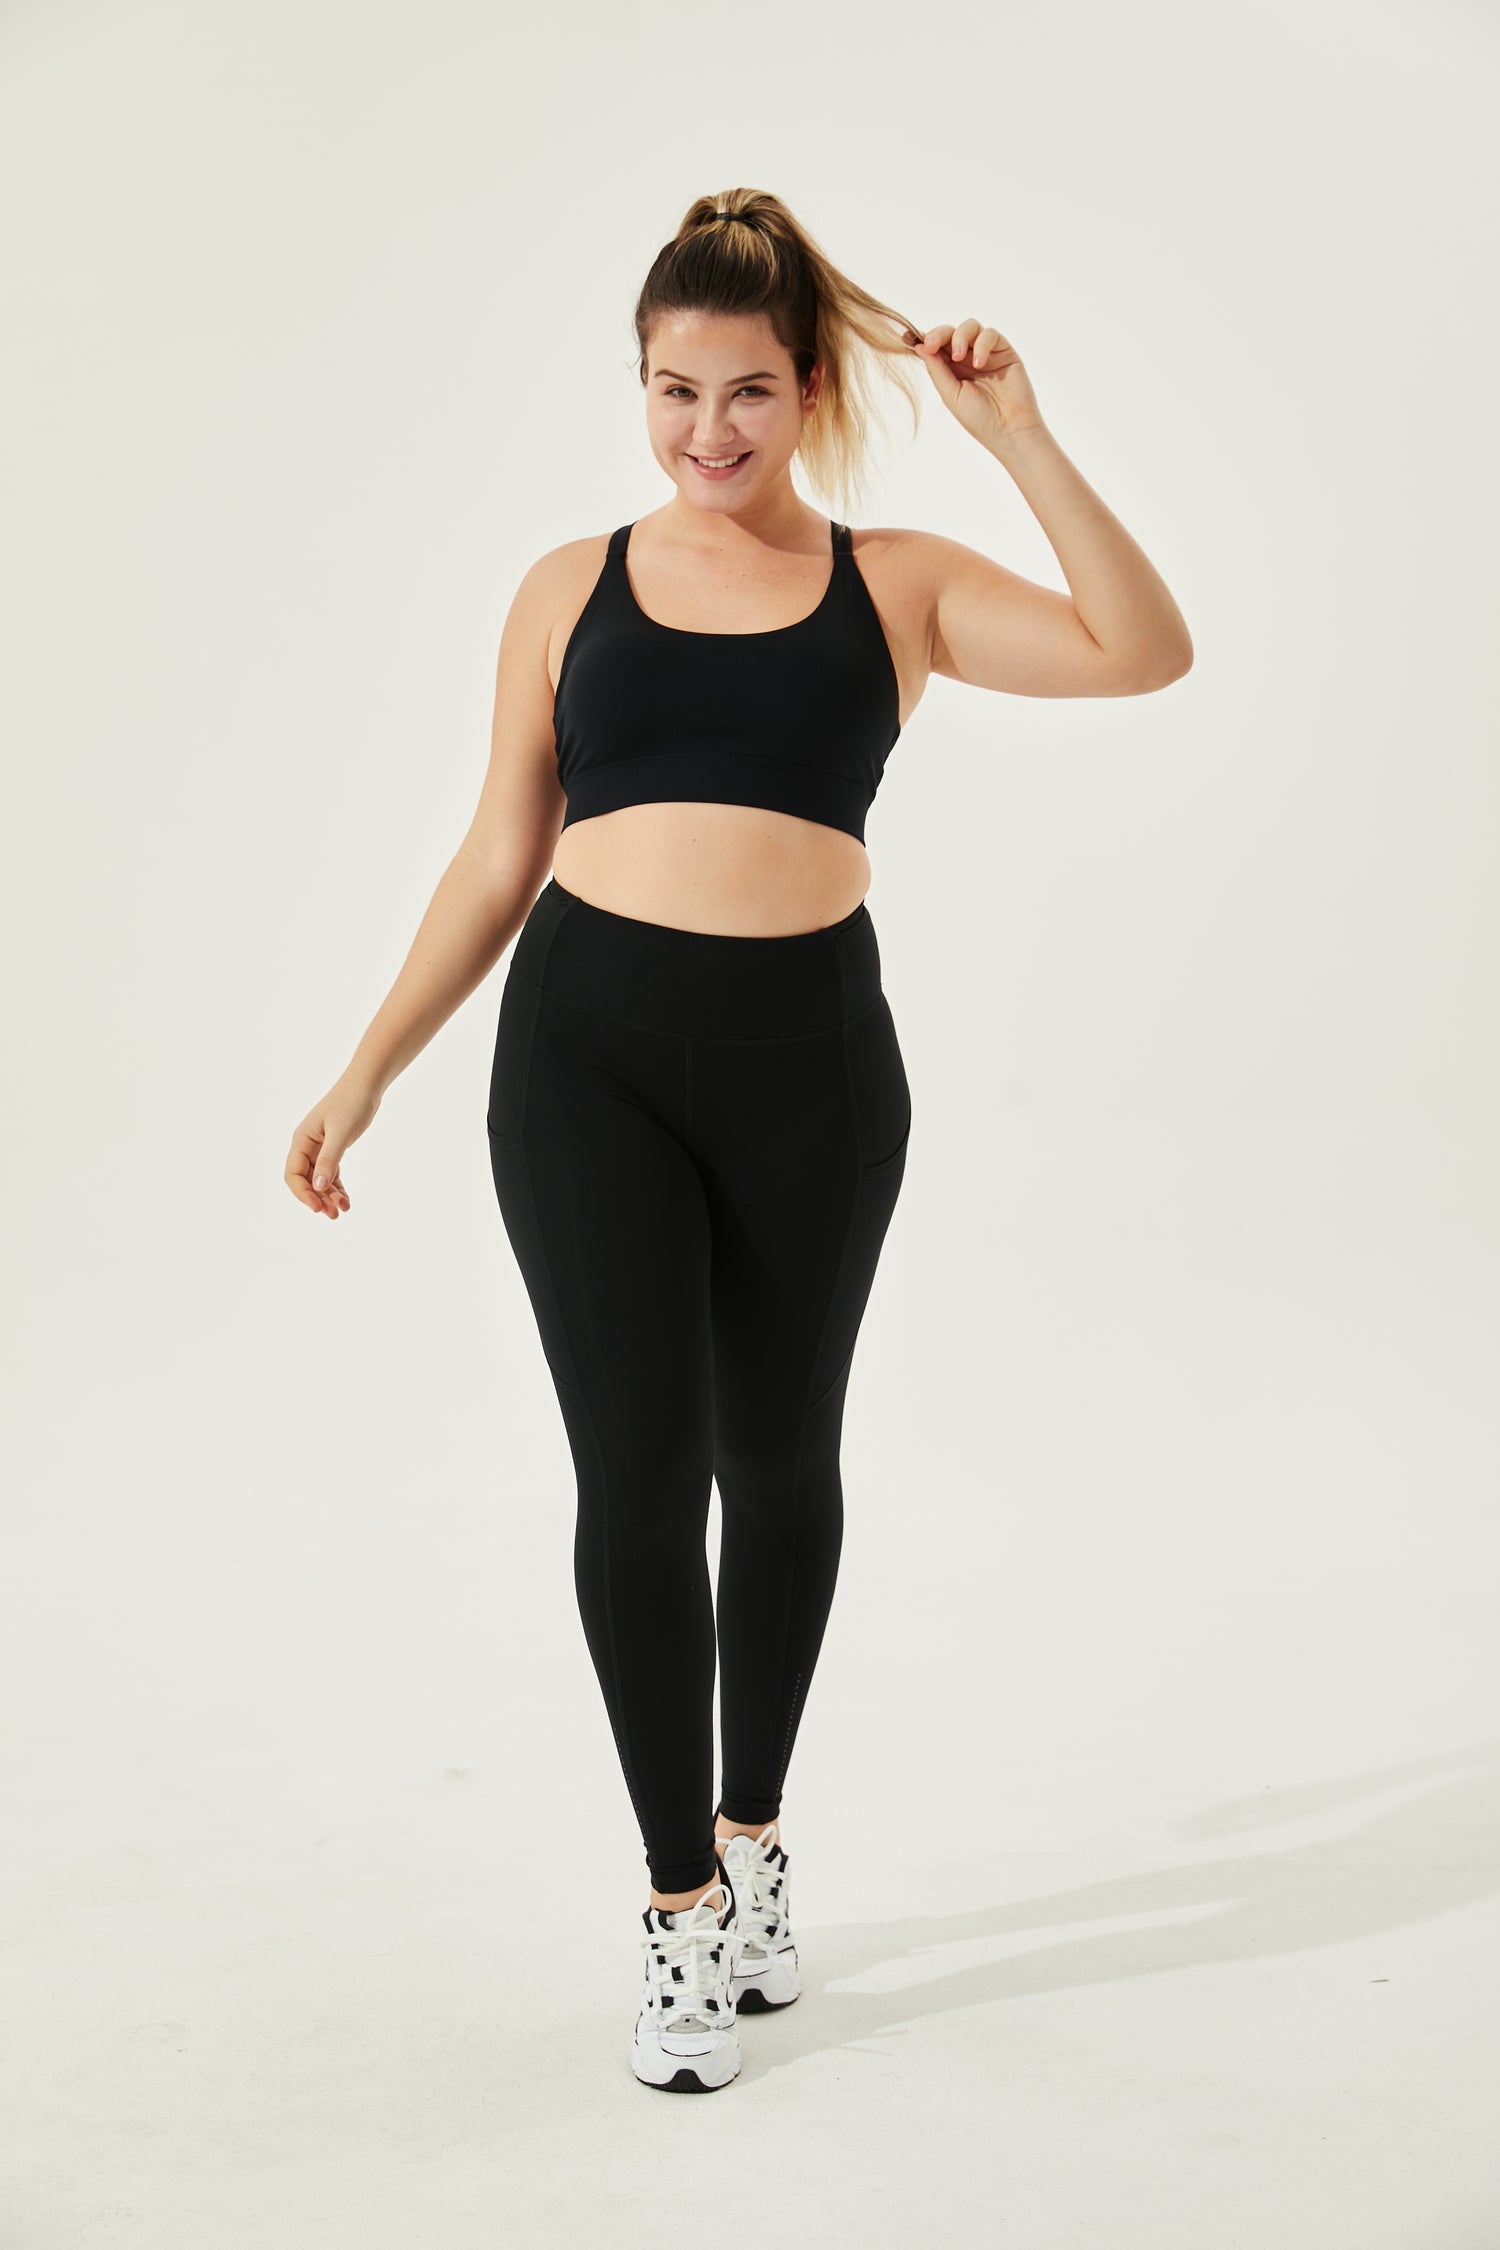 Best Plus Size Activewear Clothes And Shopping Tips – Gymwearmovement